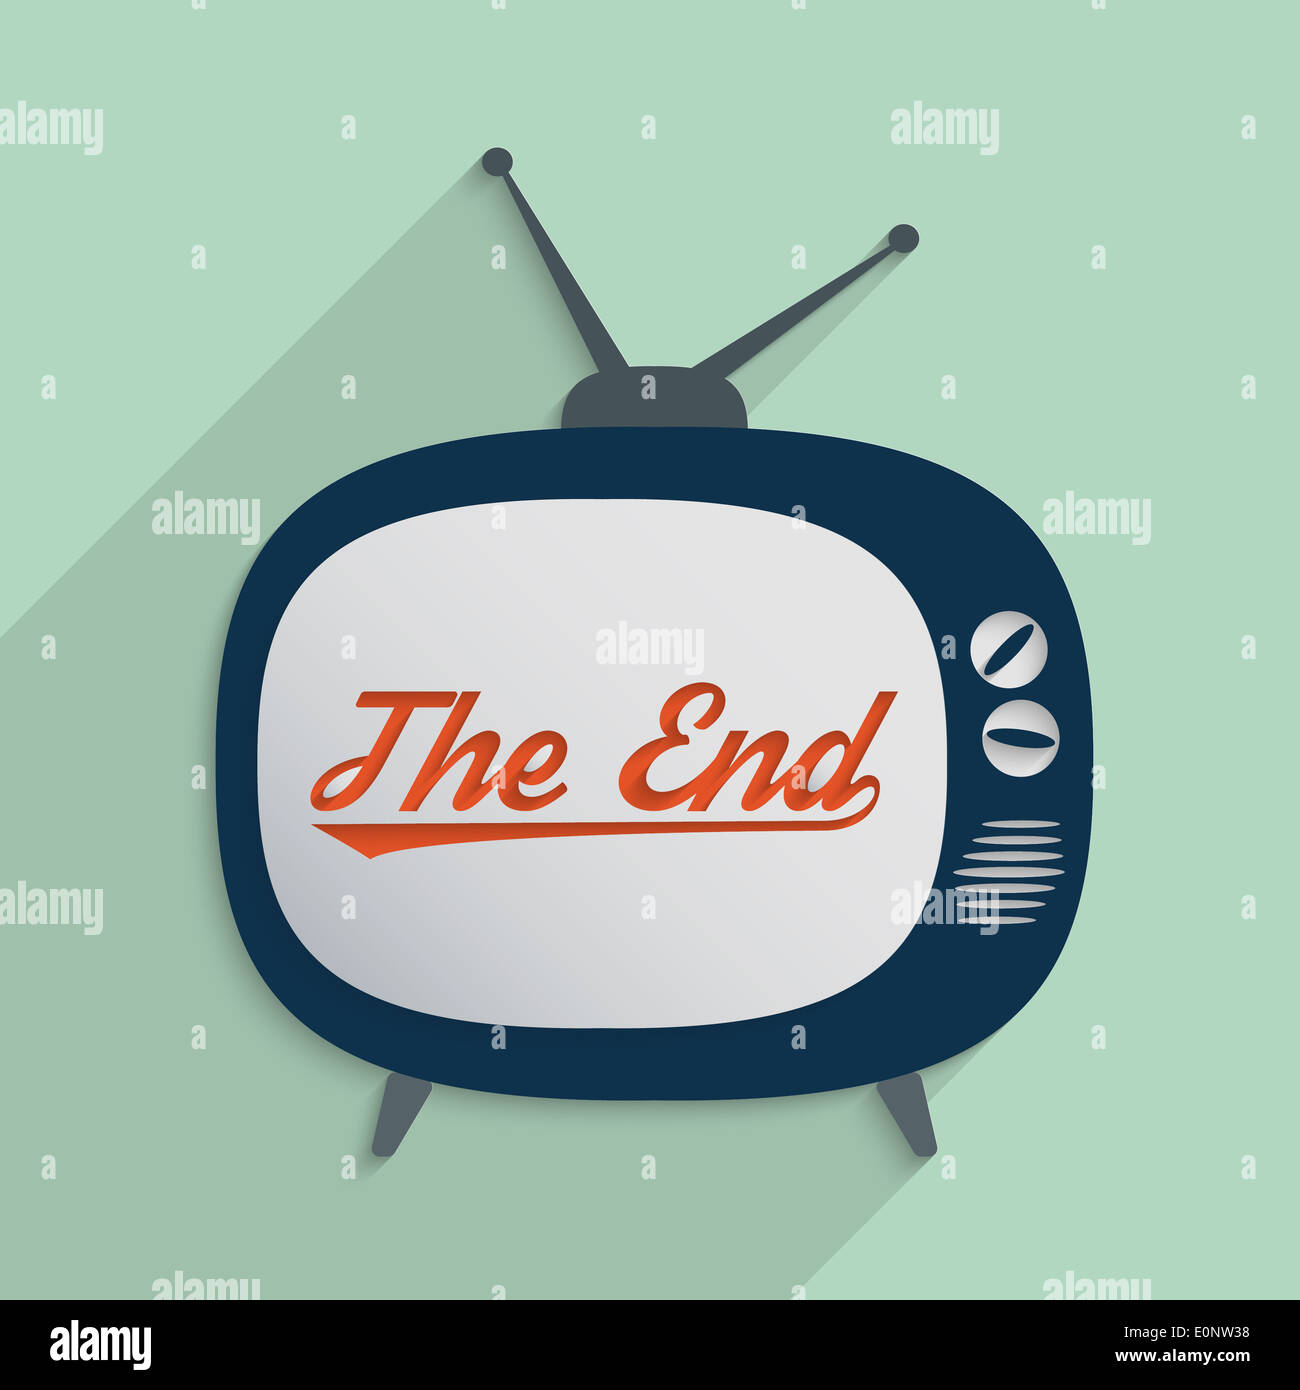 Concept for everything has an ending, arts, and entertainment industry. Flat design illustration. Stock Photo